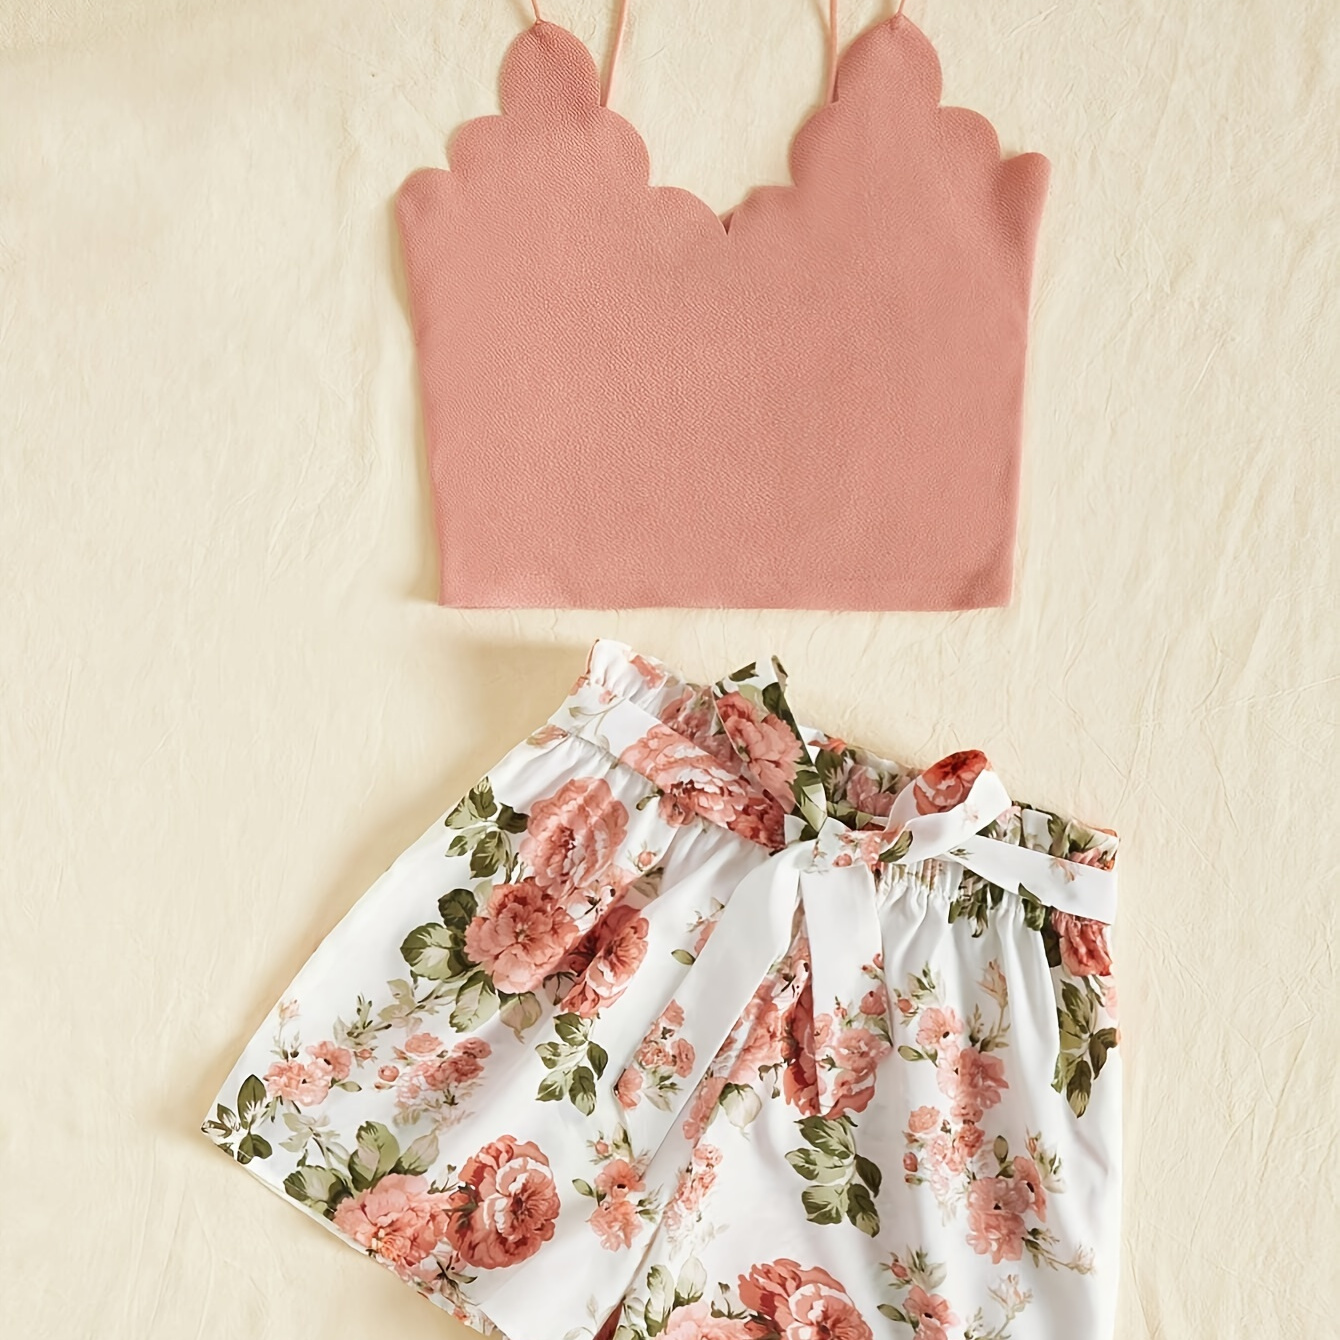 

Summer 2 Piece Set, Scallop Trim Cami Top & Floral Print Tie Waist Shorts Outfits, Women's Clothing